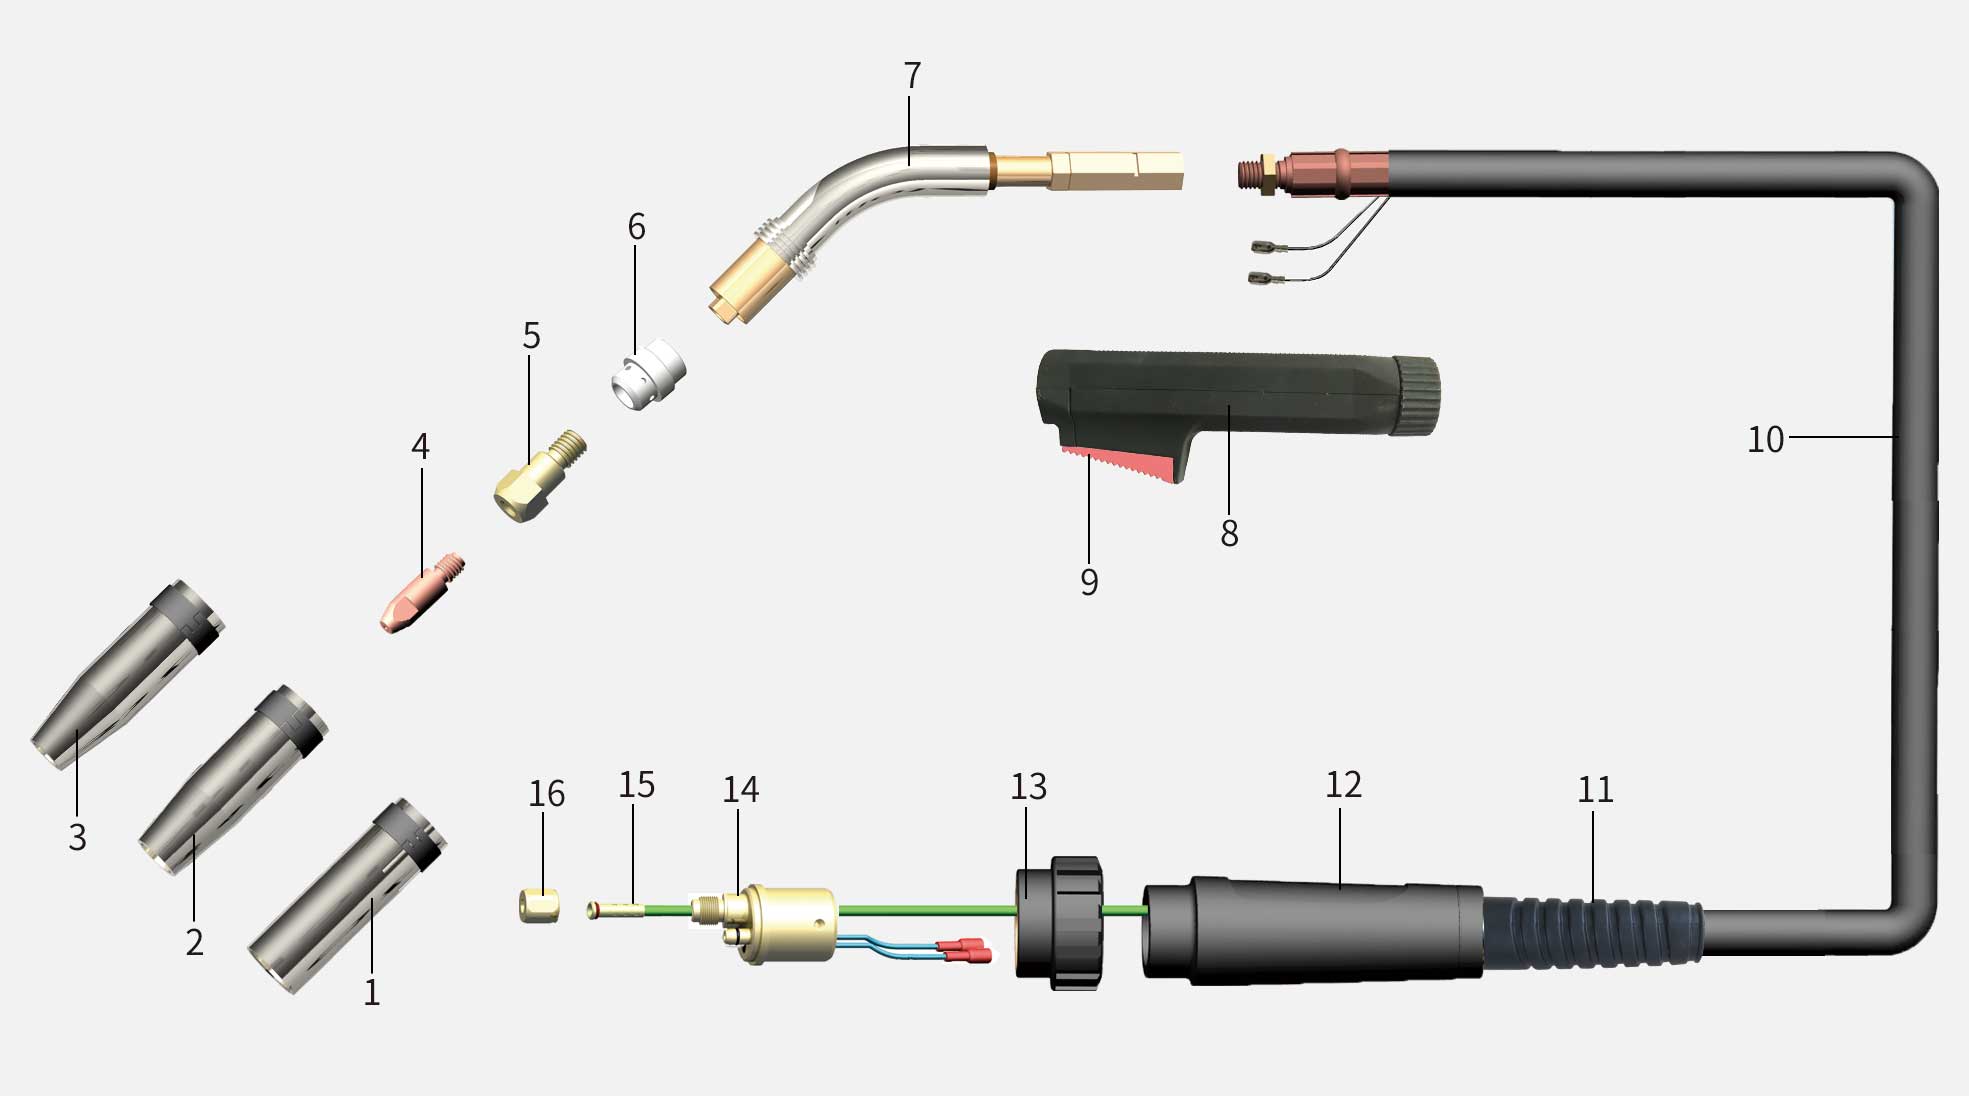 Product structure of the BW 23KD Air cooled MIG/MAG welding torch